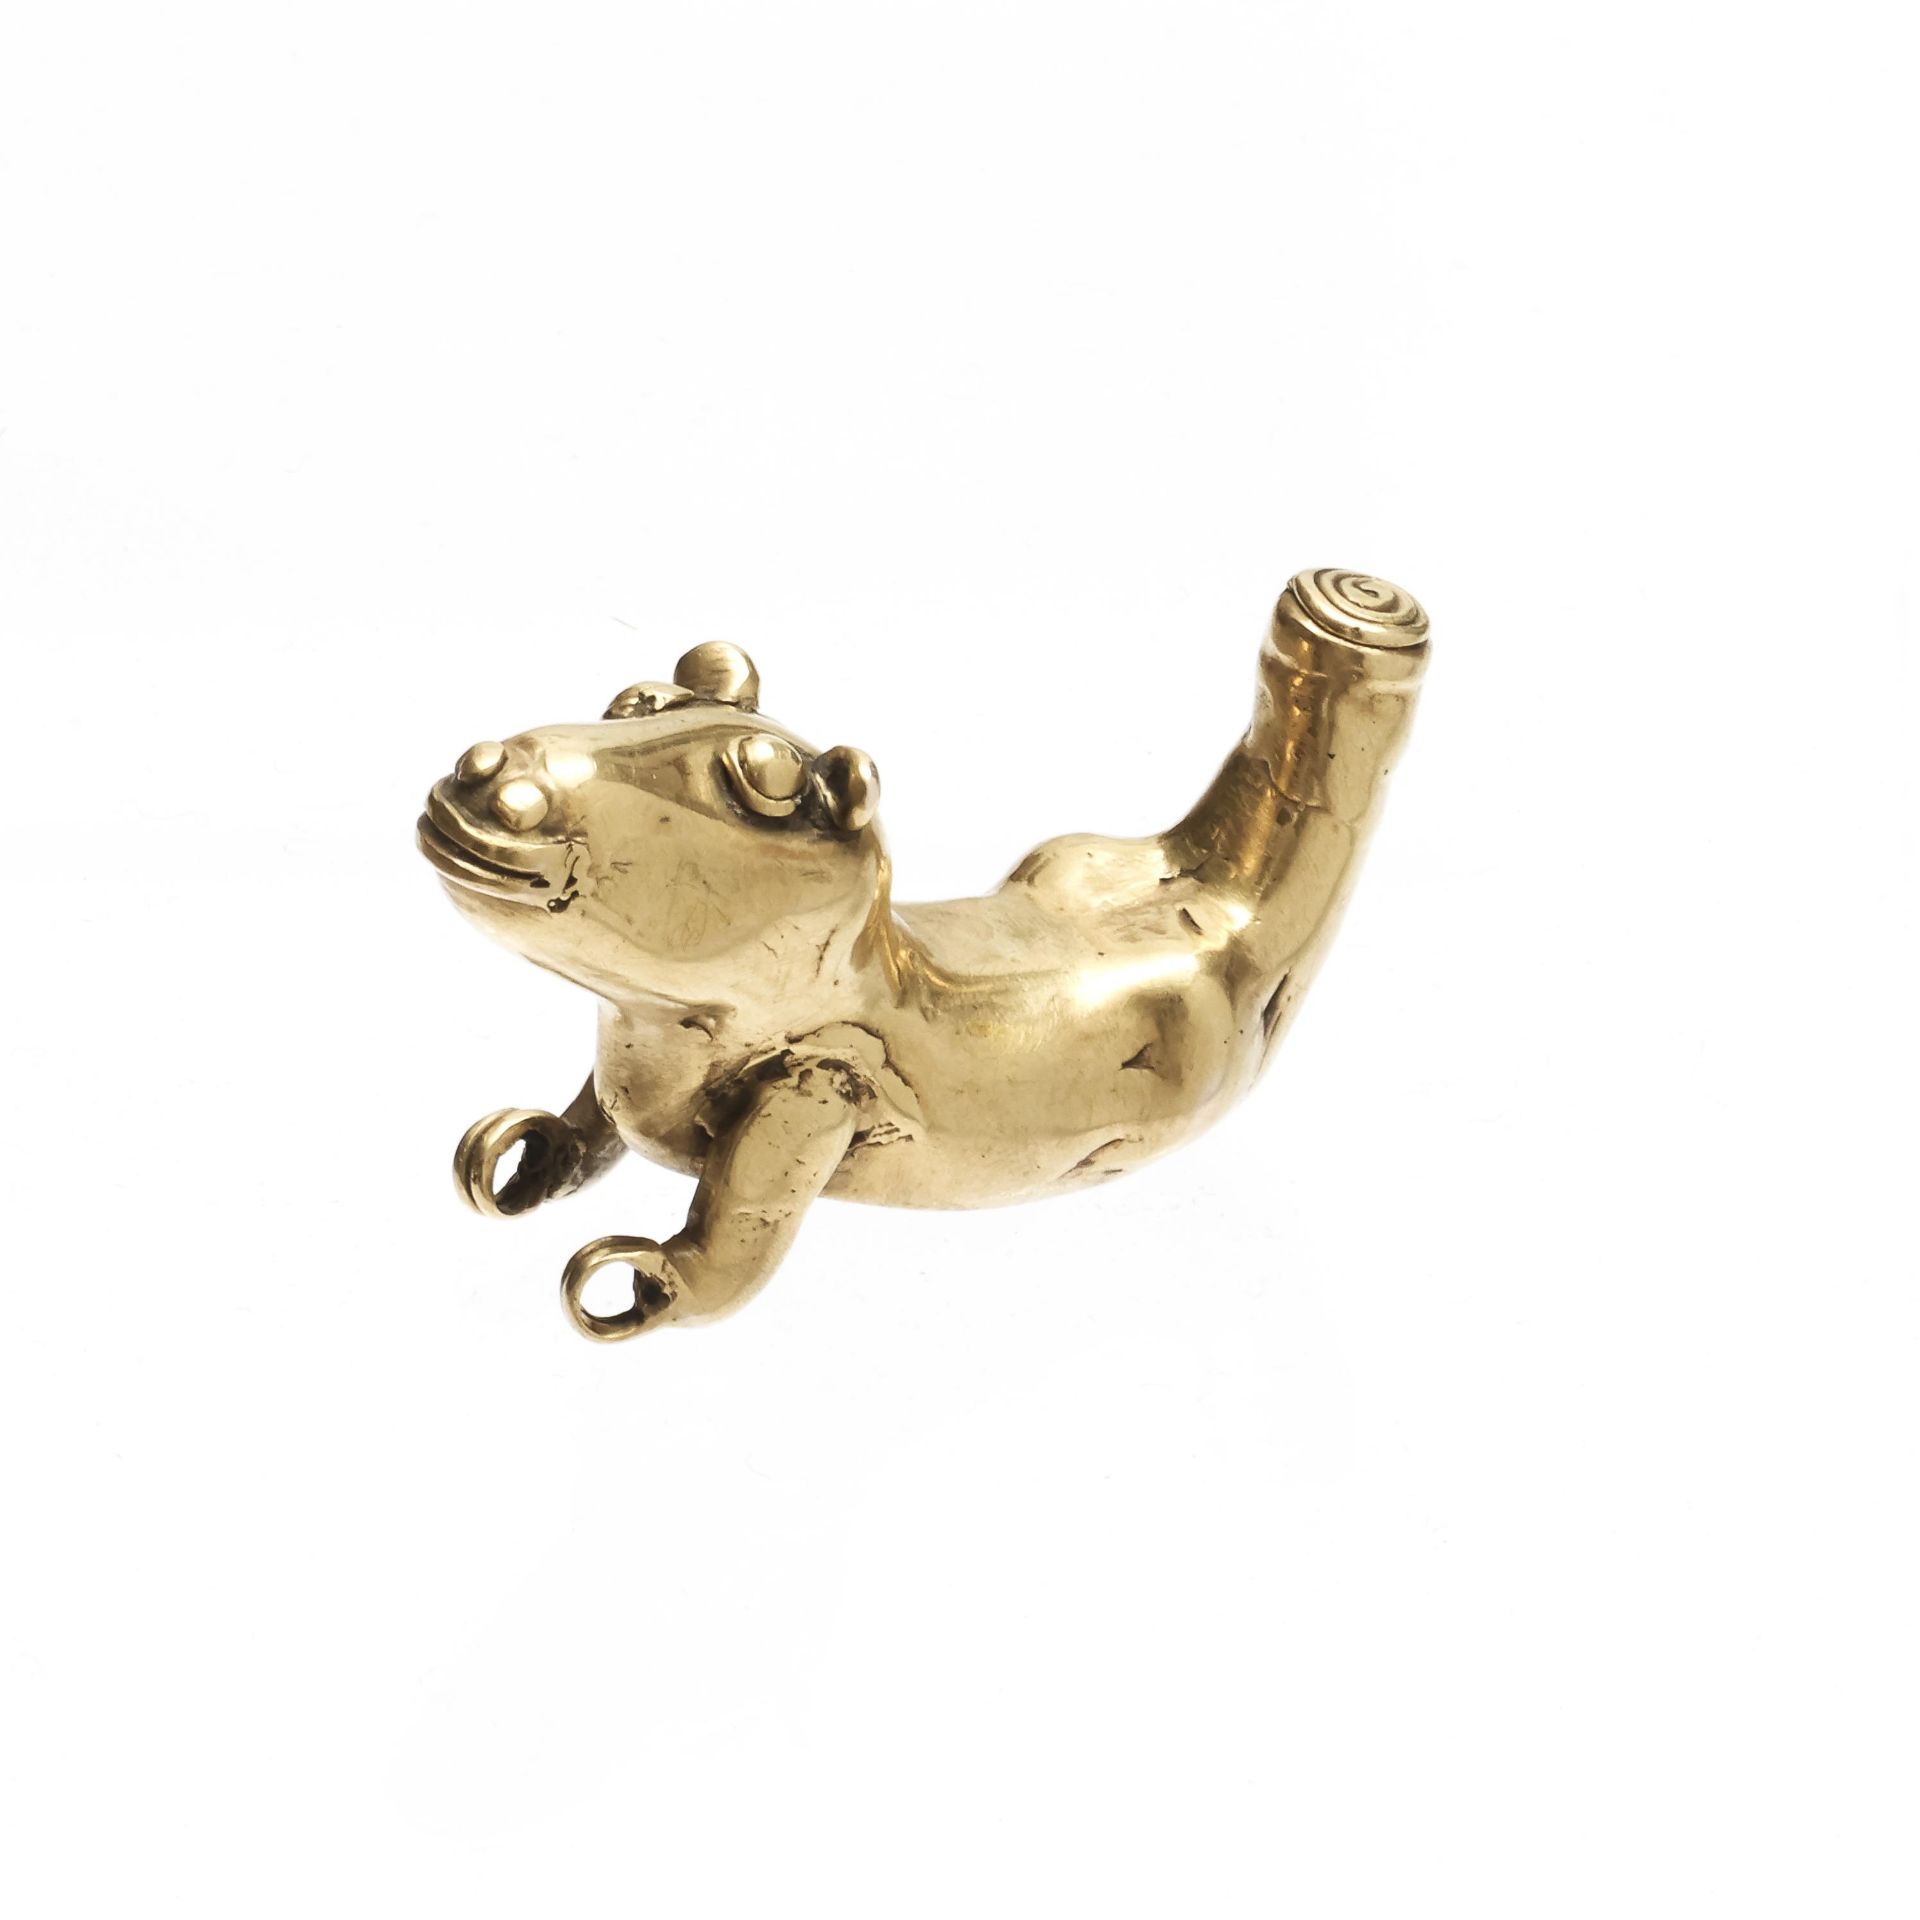 Panama, Veraguas, 11th-16th century AD, 14- kt gold pendant in the form of a animal